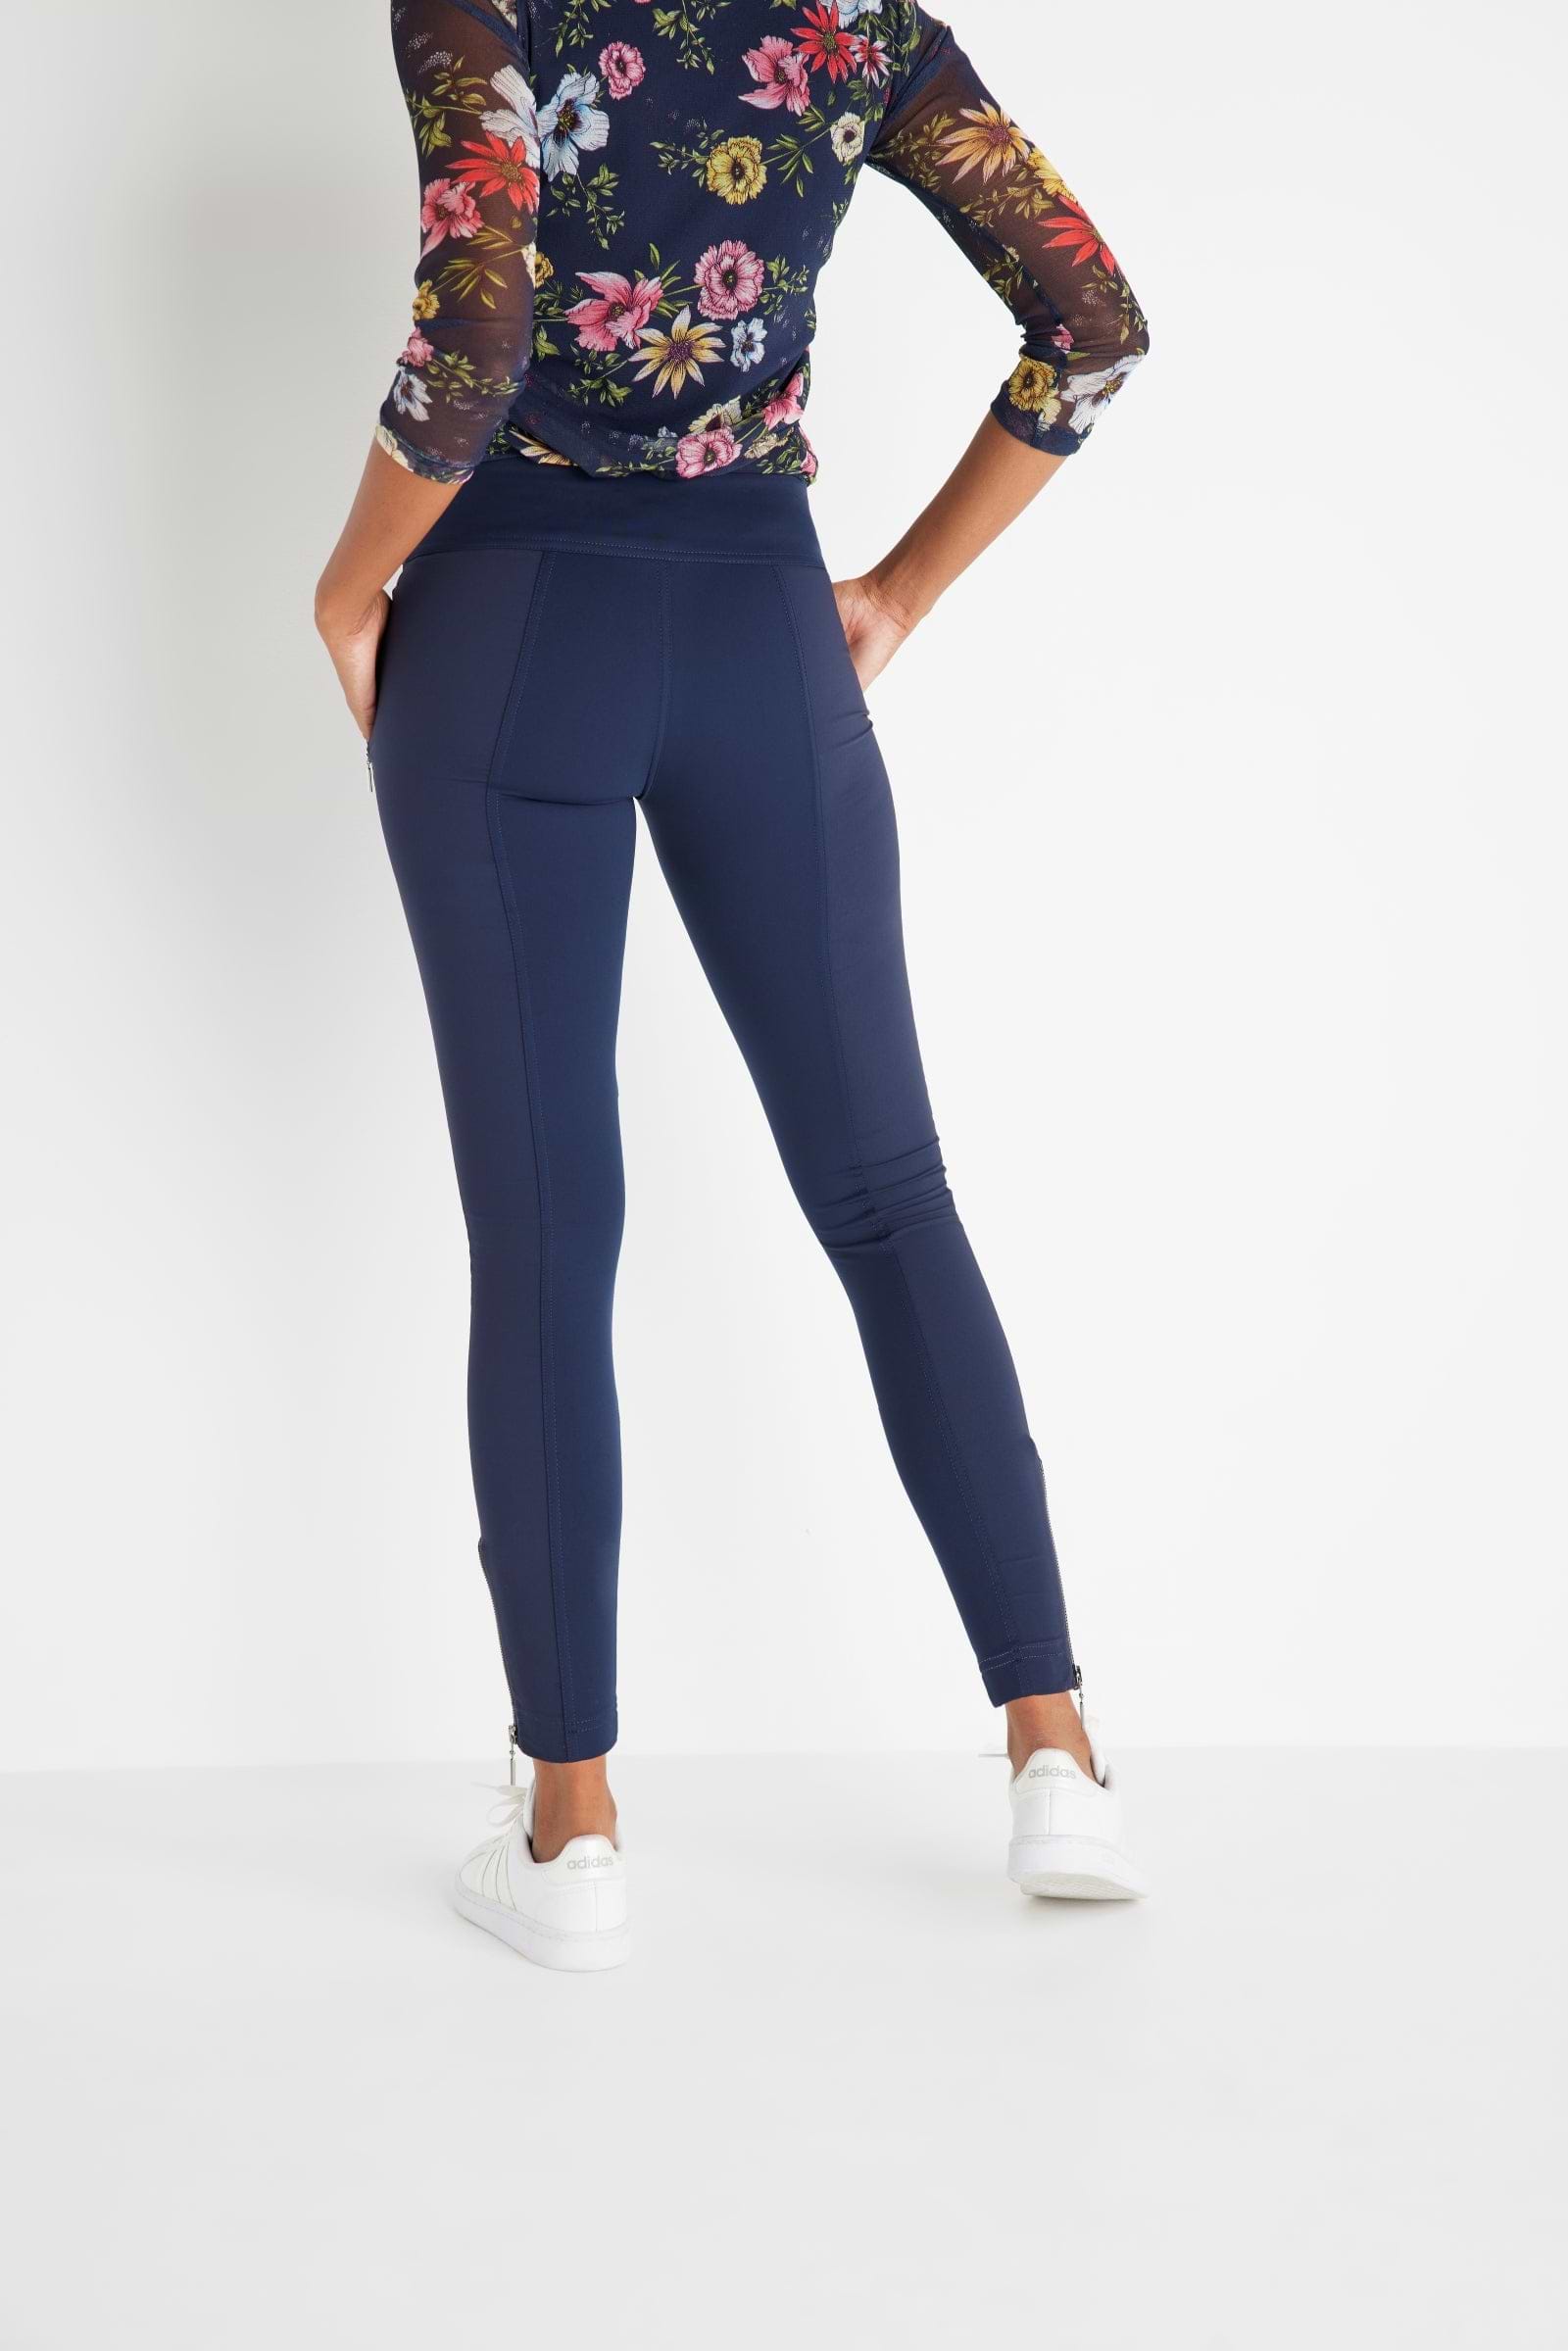 The Best Travel Pants. Back Profile of the Allie Pant in Navy